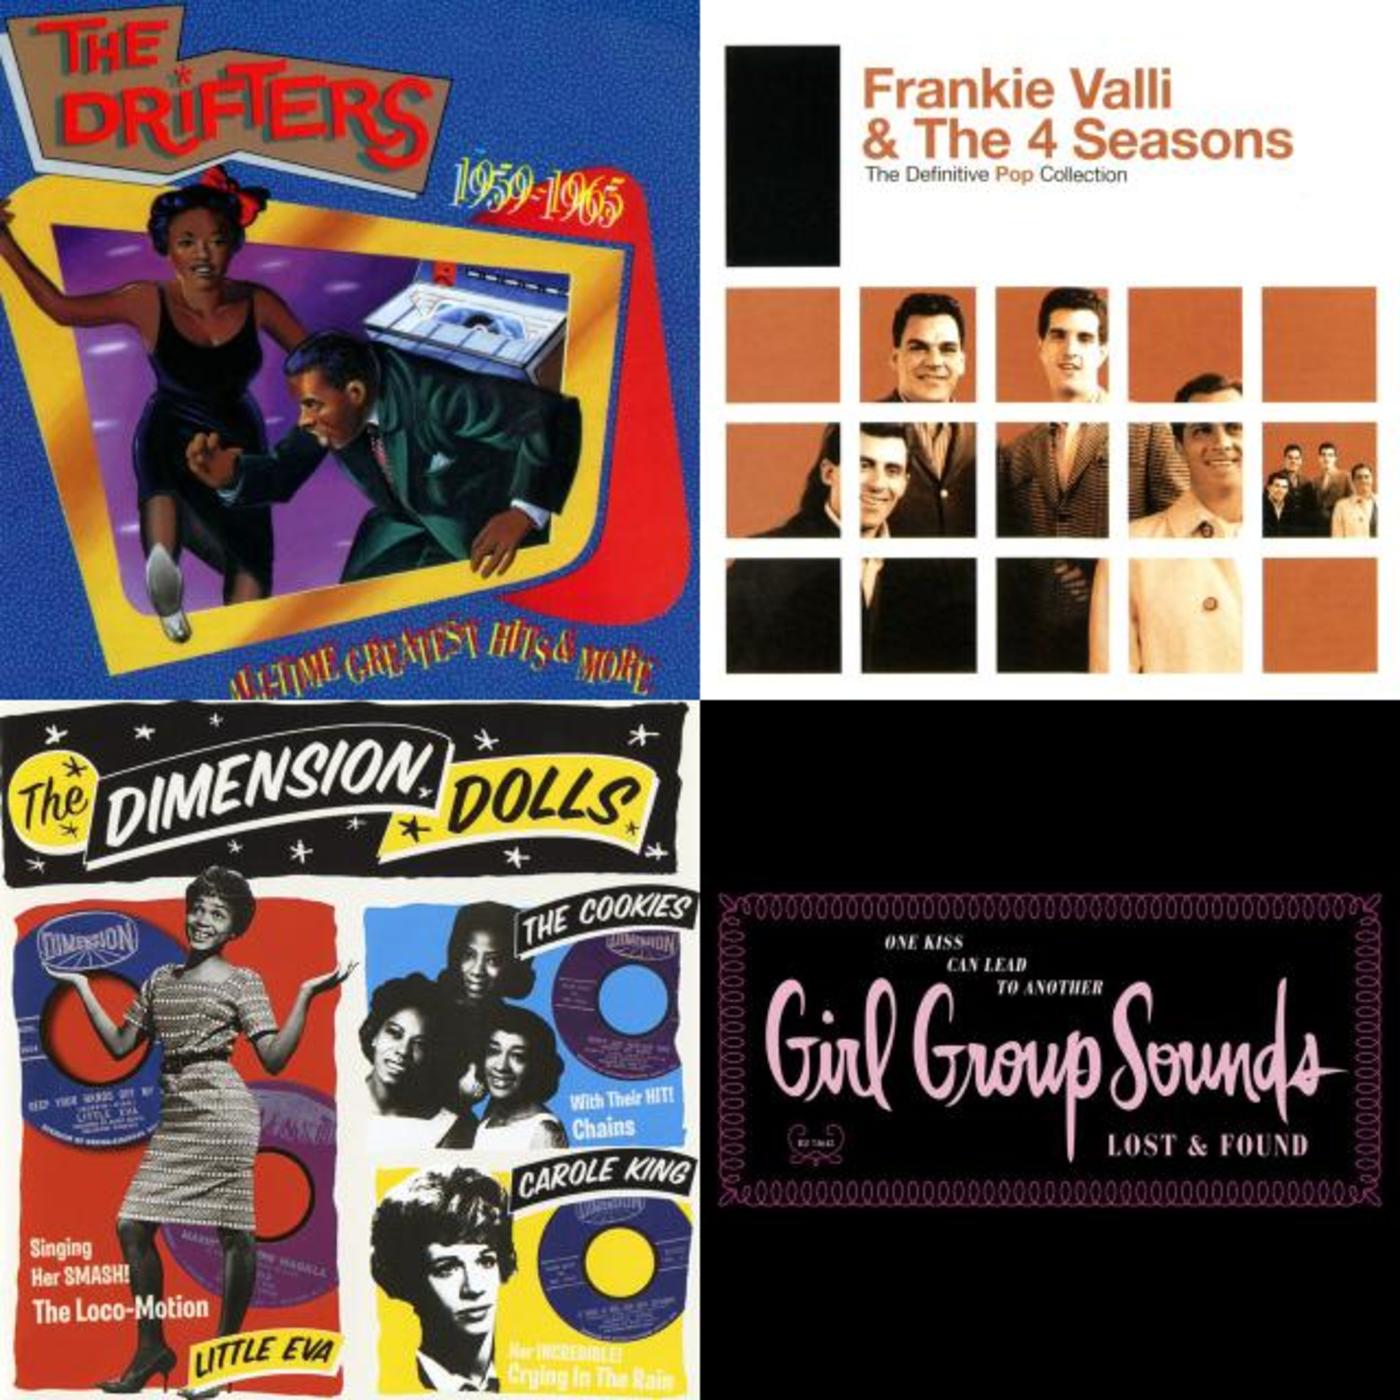 RIP Gerry Goffin - Frankie Valli & The Four Seasons, The Drifters, The Cookies, Little Eva, Kylie Minogue, The Happenings, Susan Cowsill, The Chiffons, The Paris Sisters, Aretha Franklin